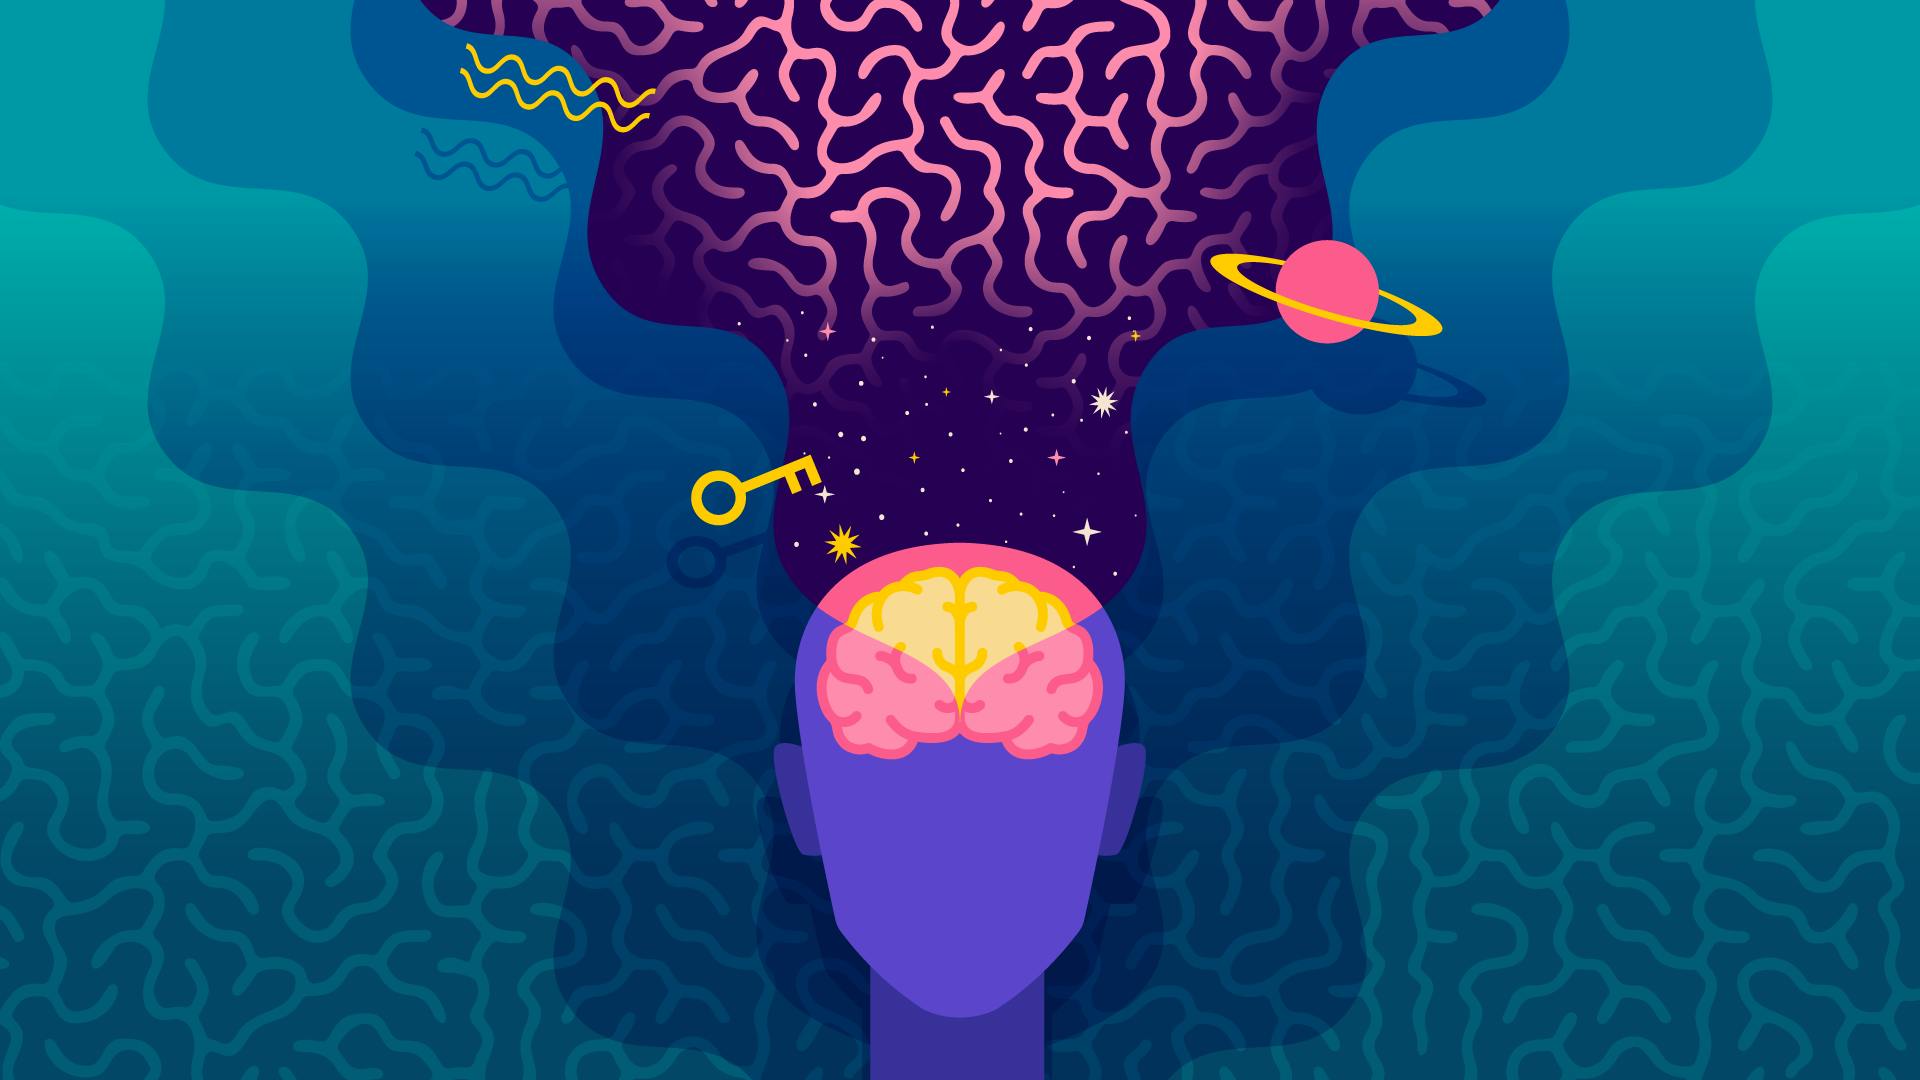 Graphic illustration of a mind  with a key and a planet with a ring